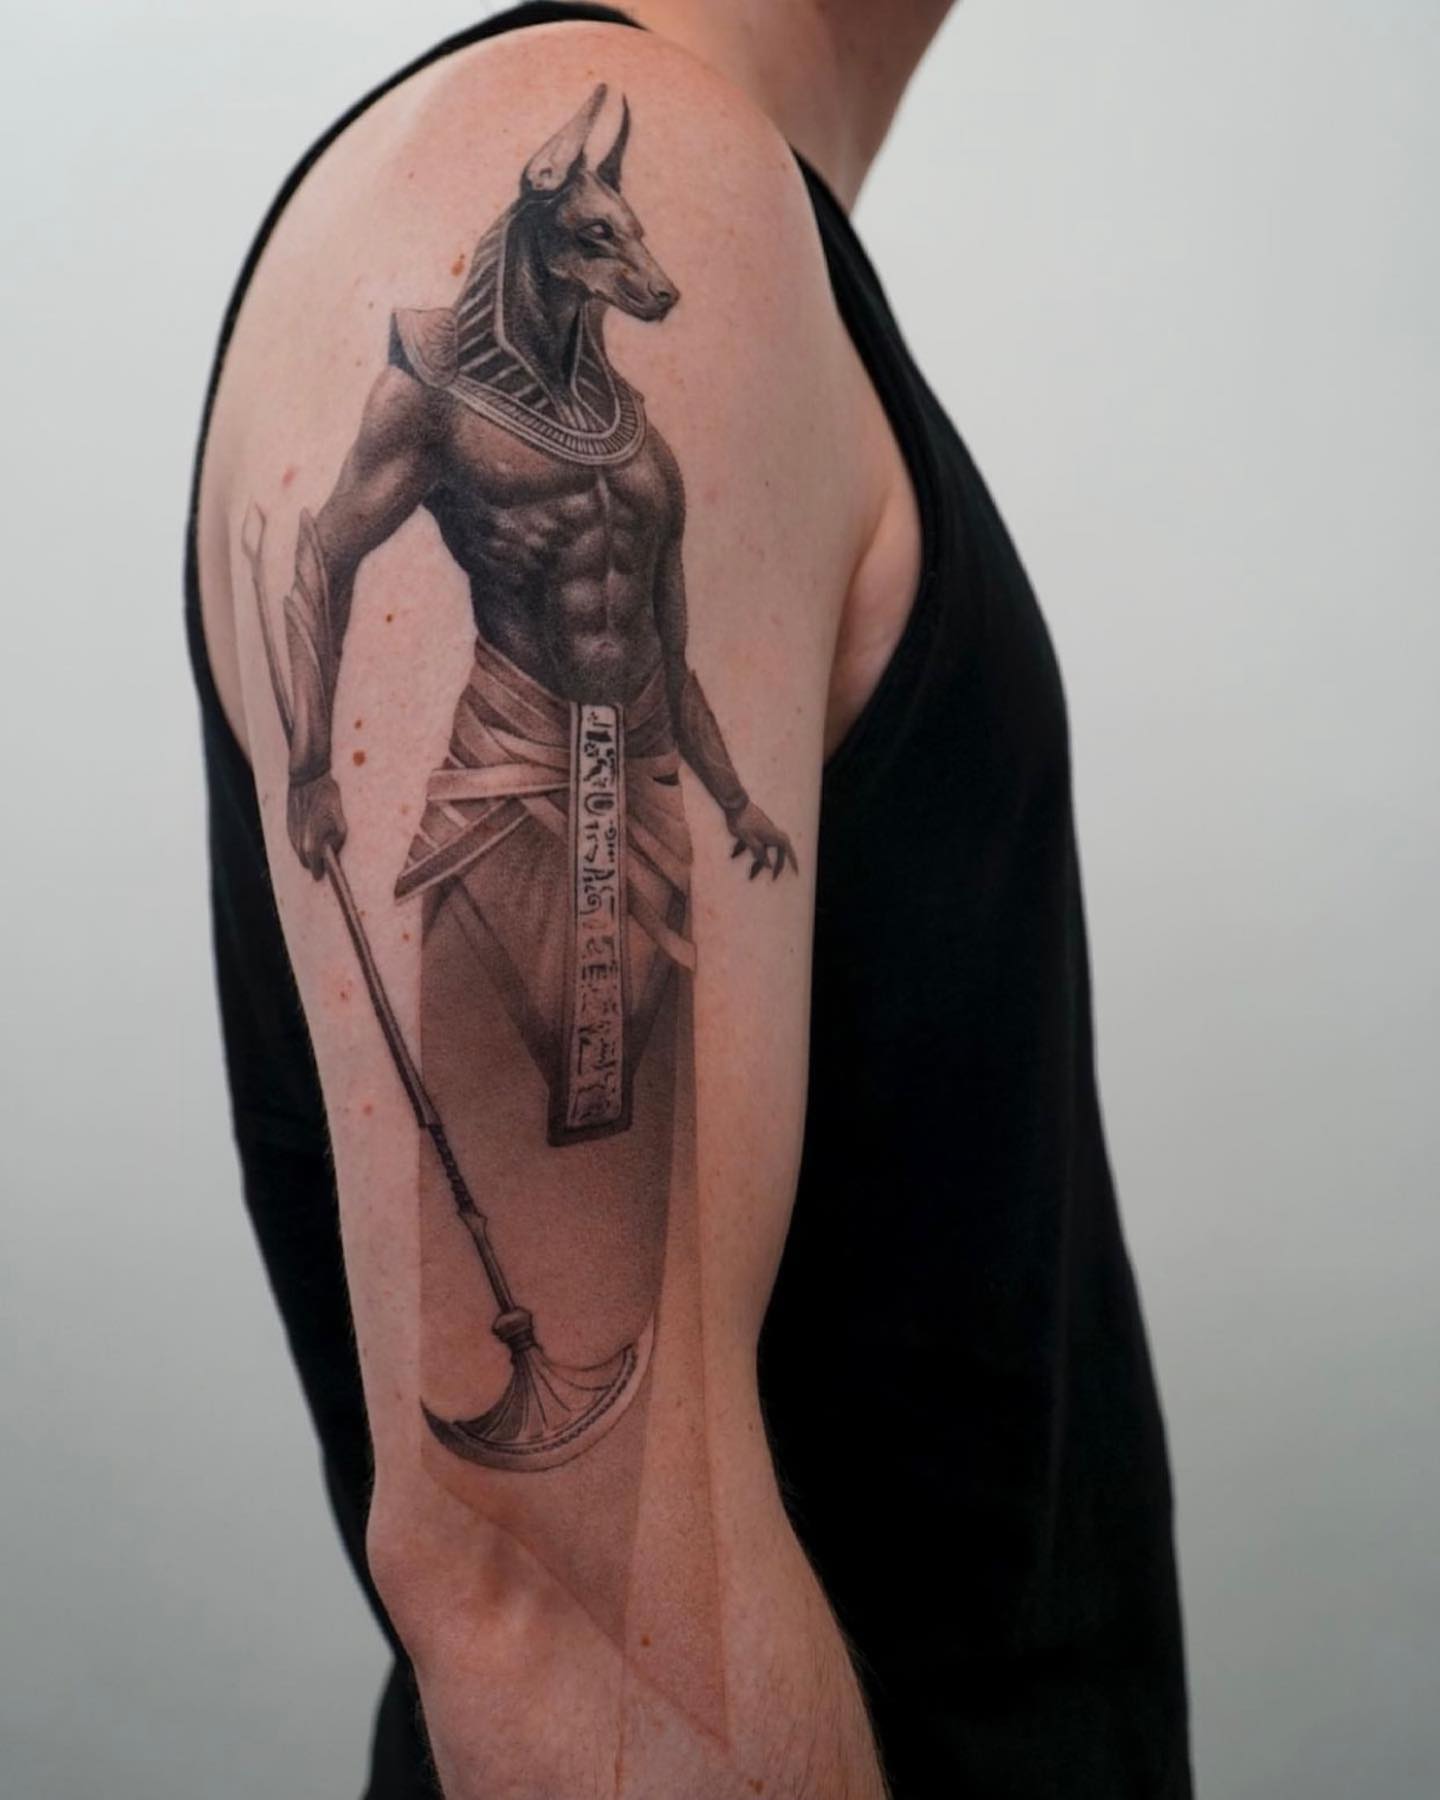  If you want to get a shady Anubis tattoo, this design will suit on you.